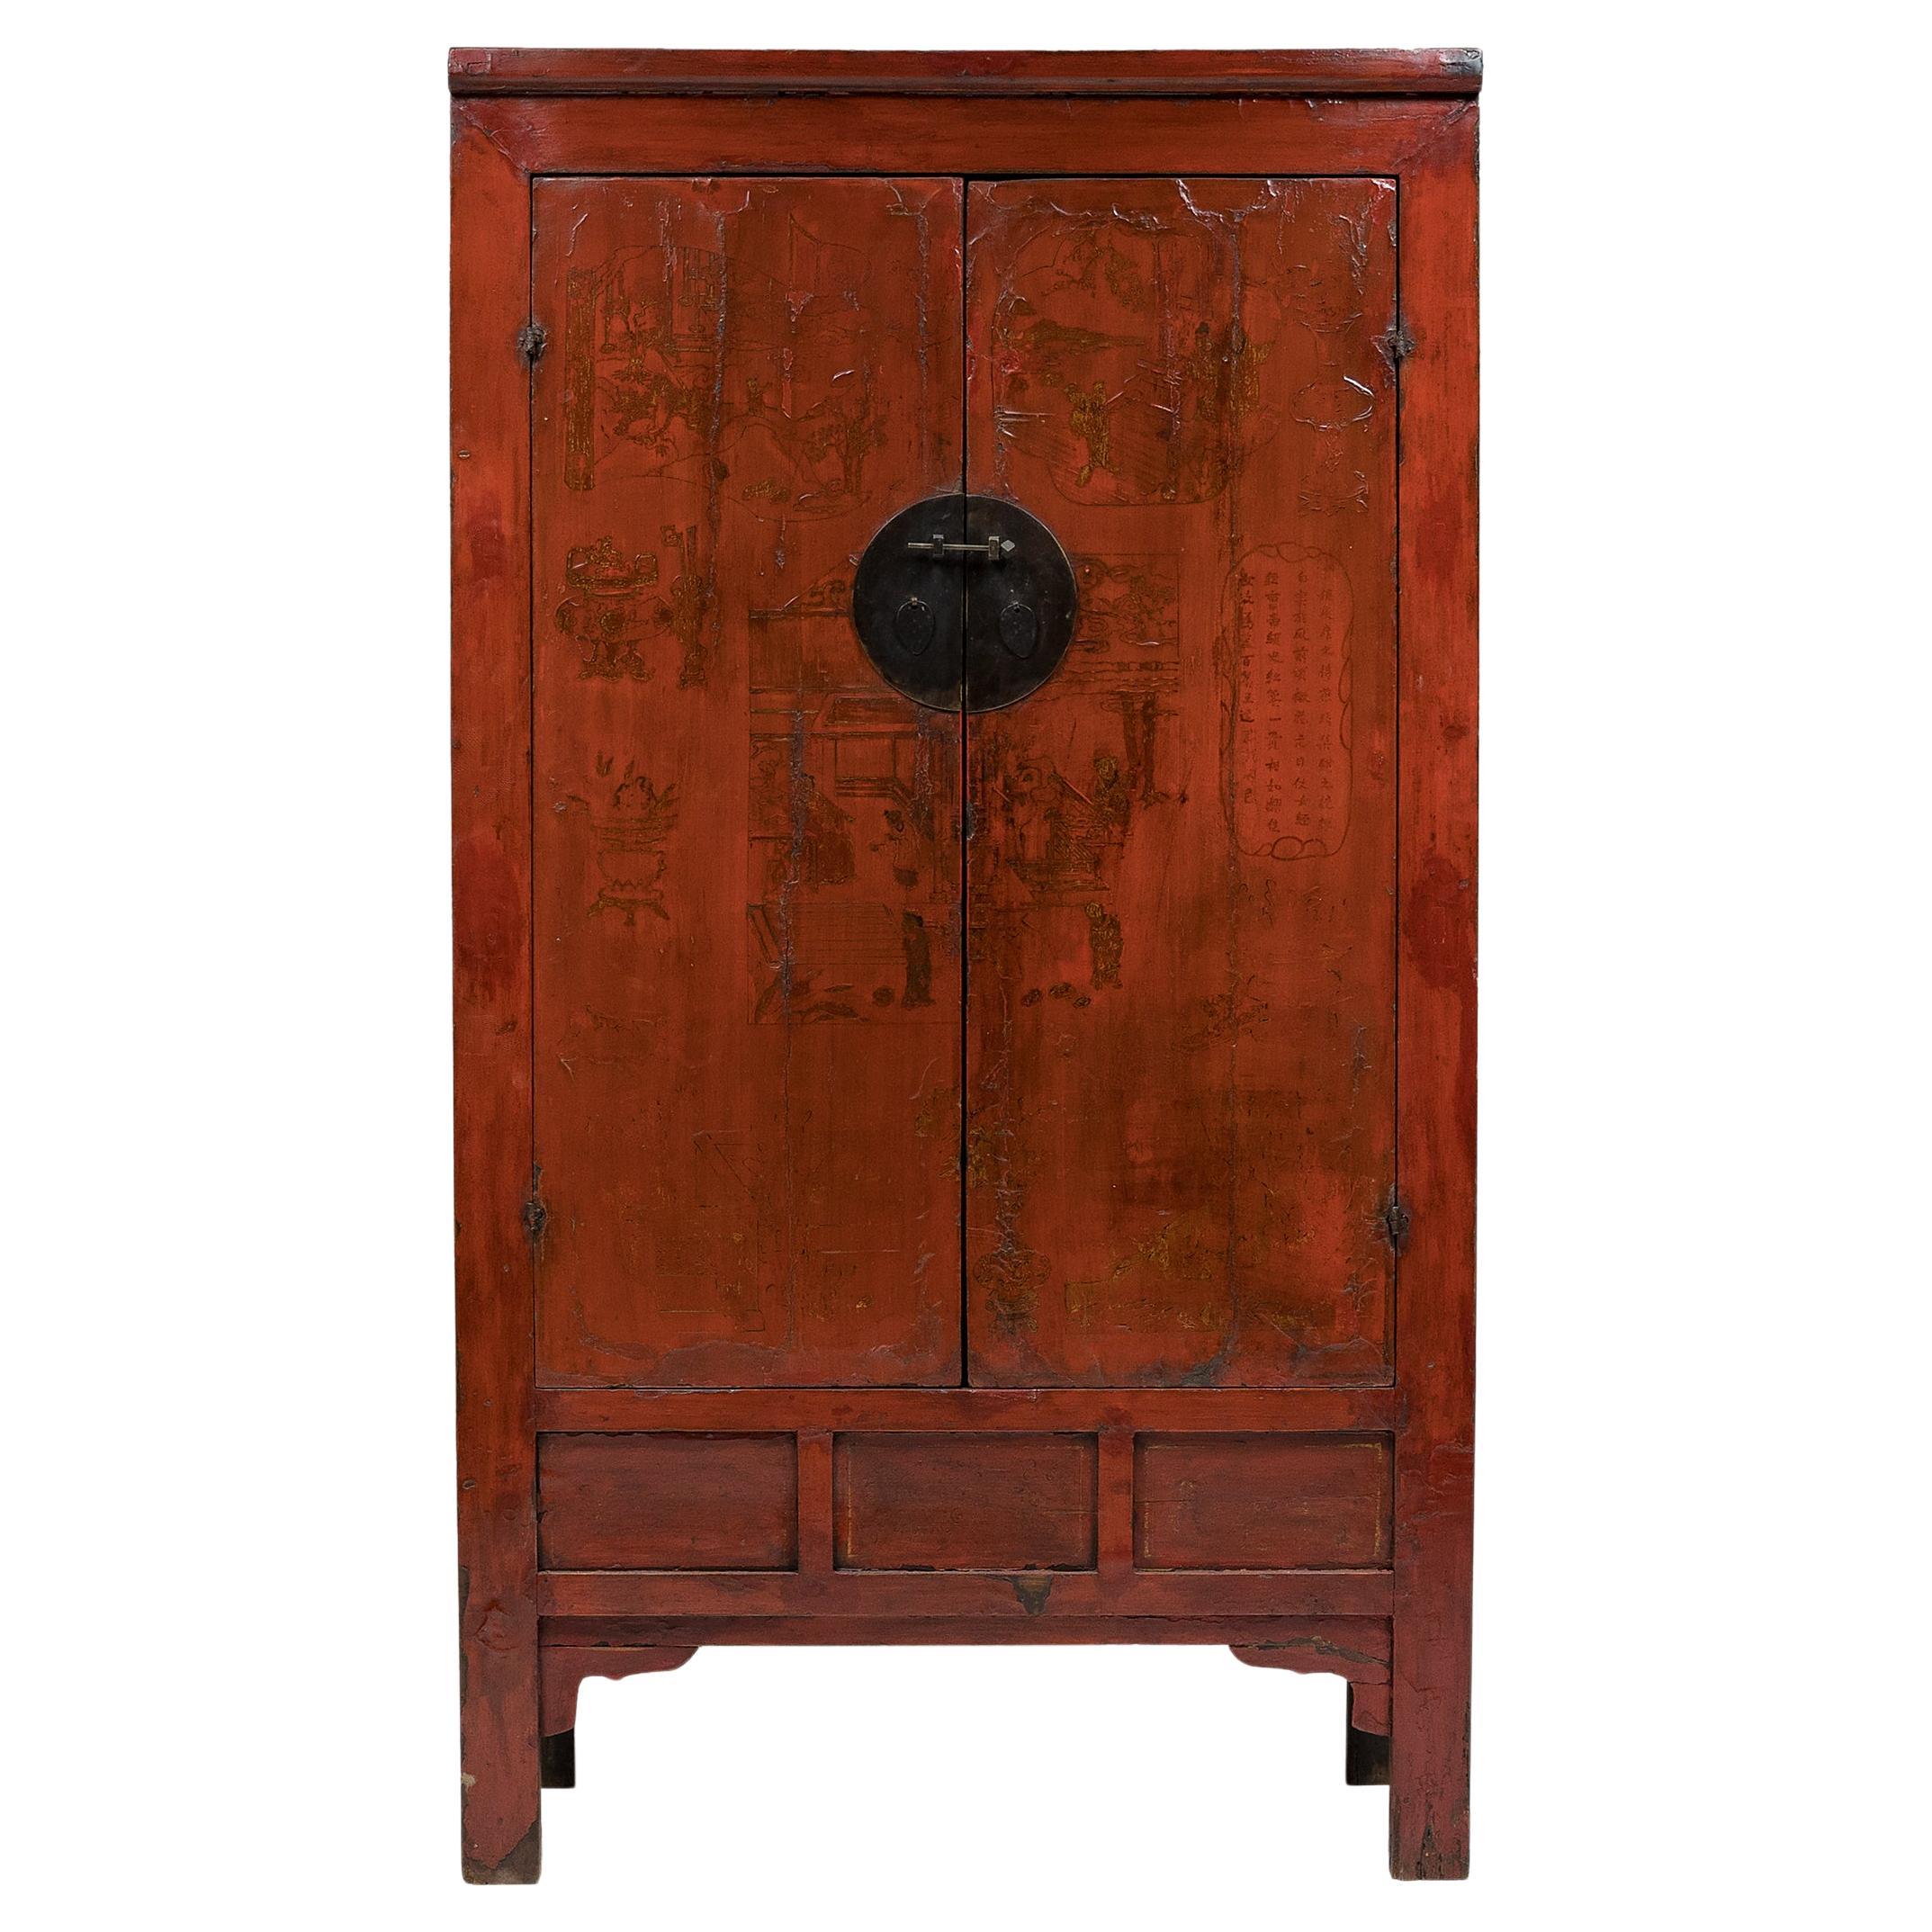 Chinese Red Lacquer Scholars' Cabinet, circa 1850